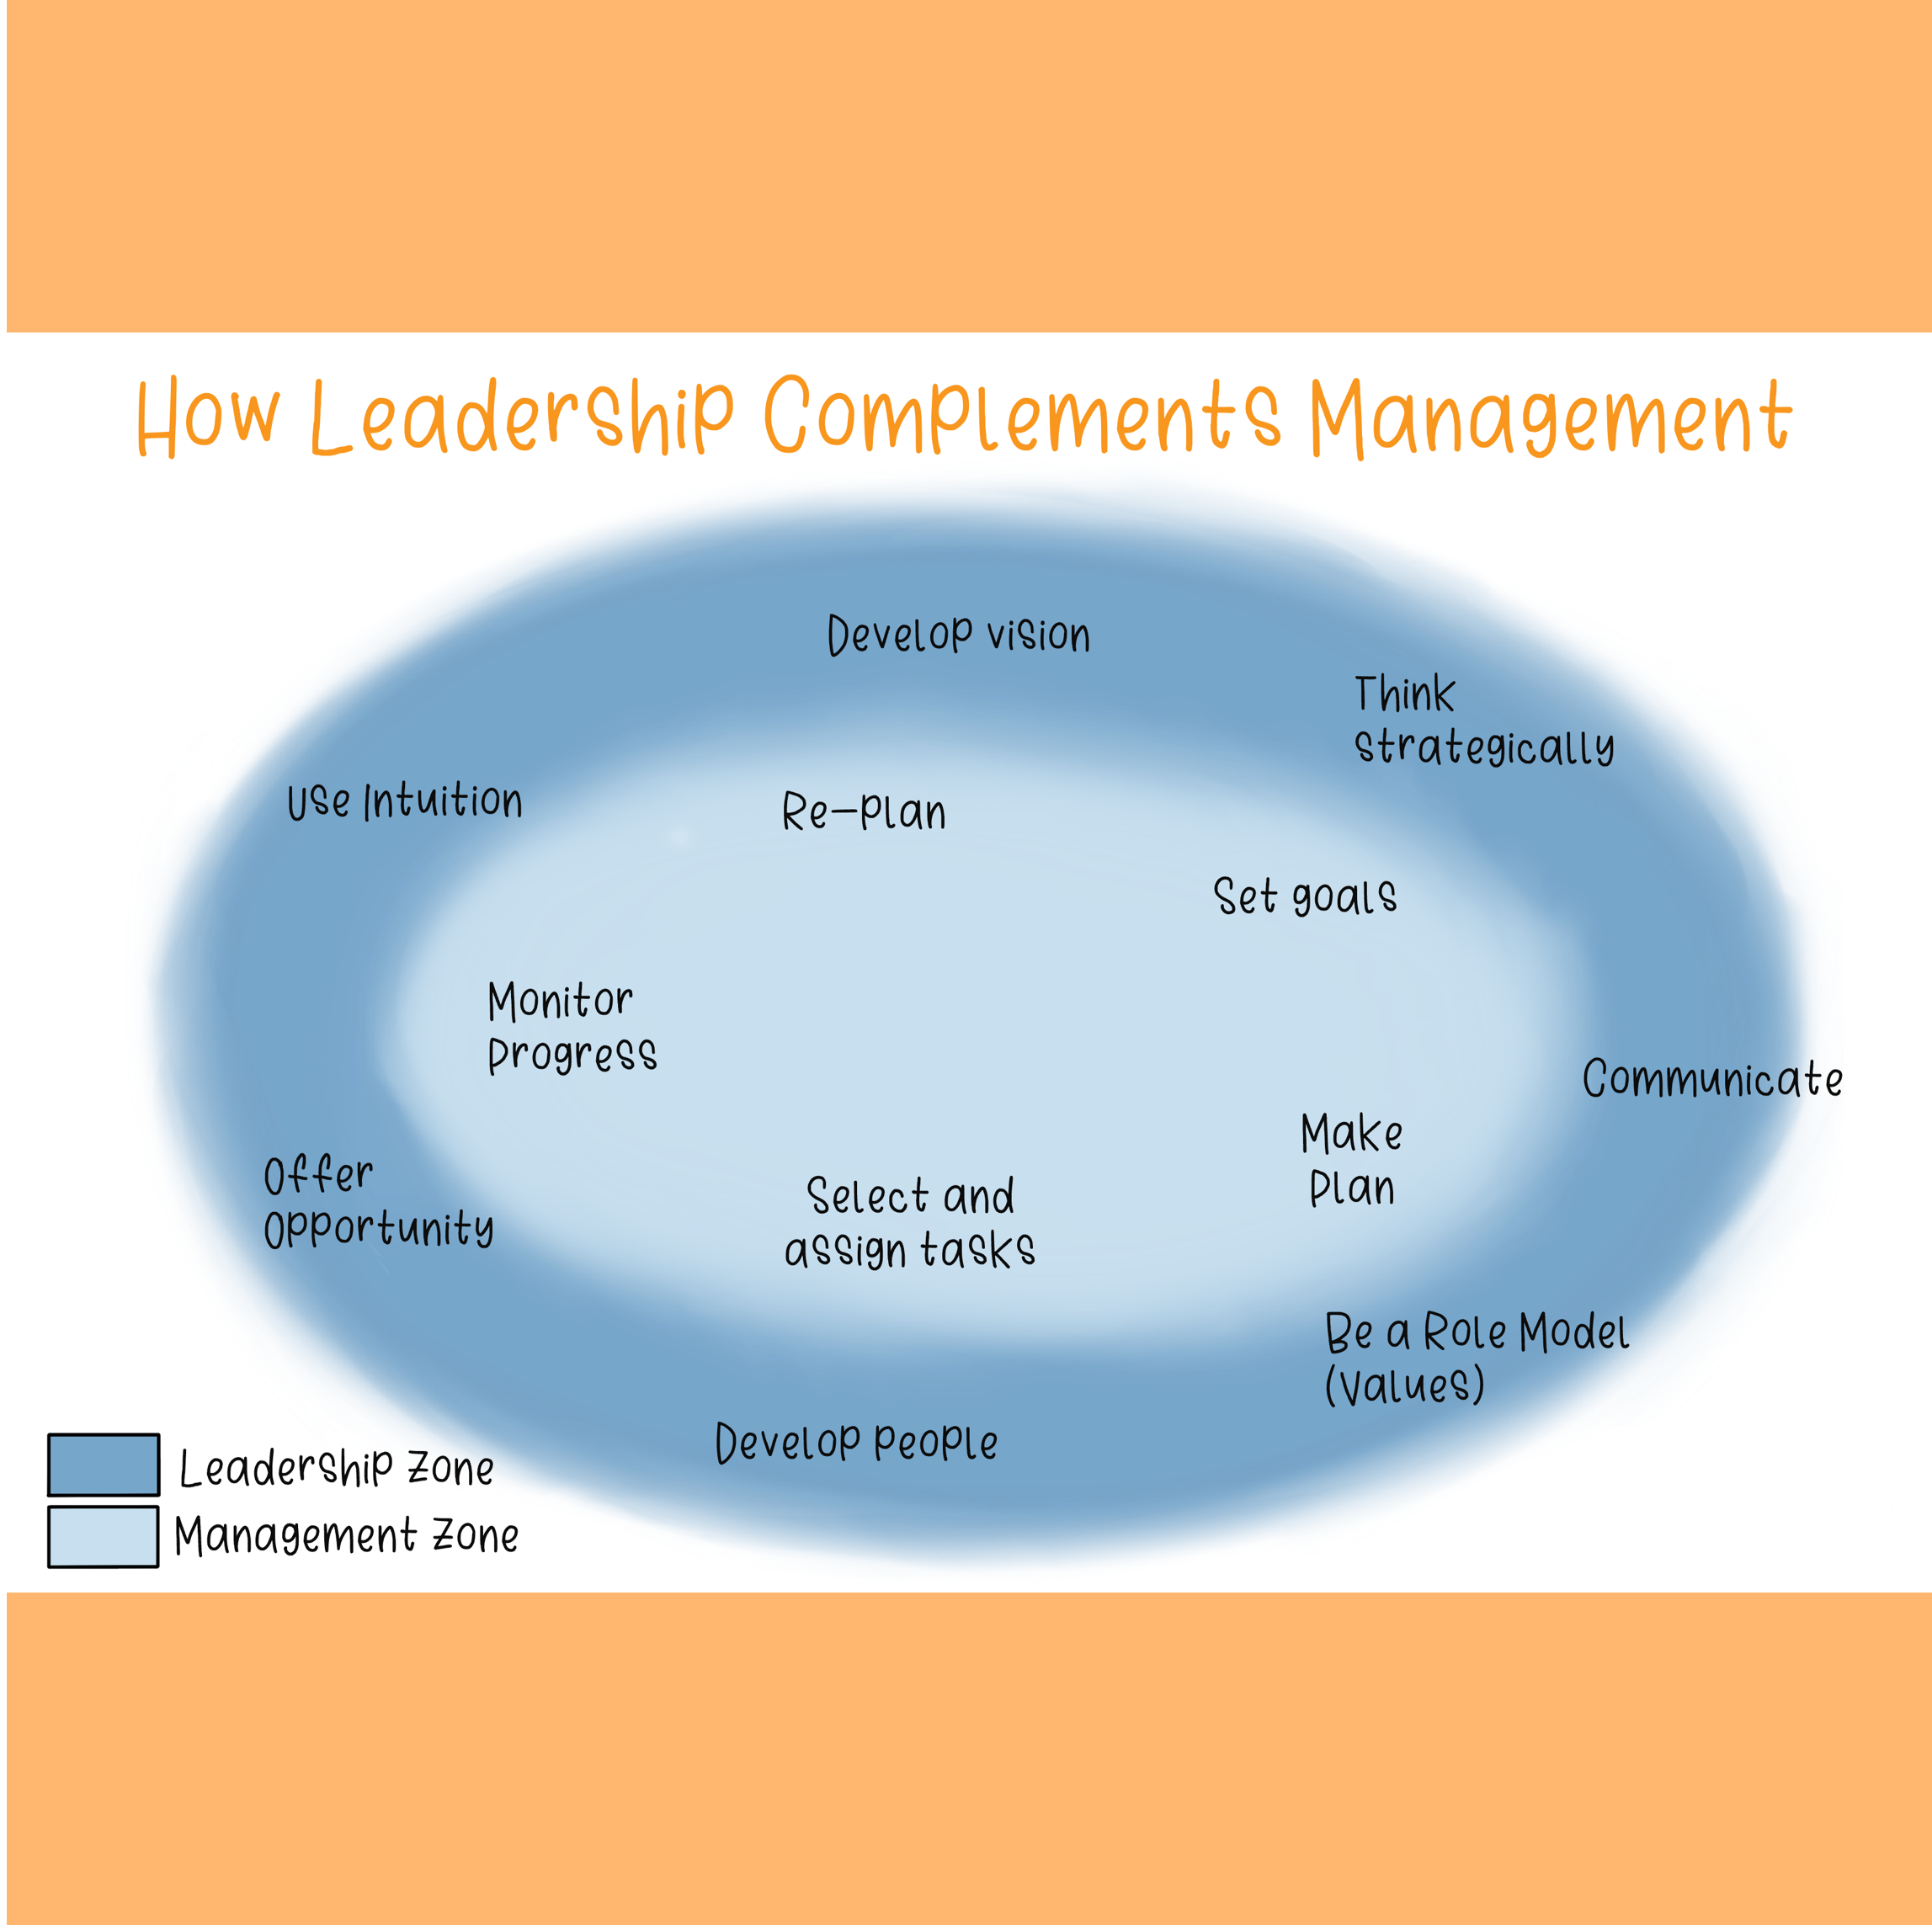 How Leadership Complements Management